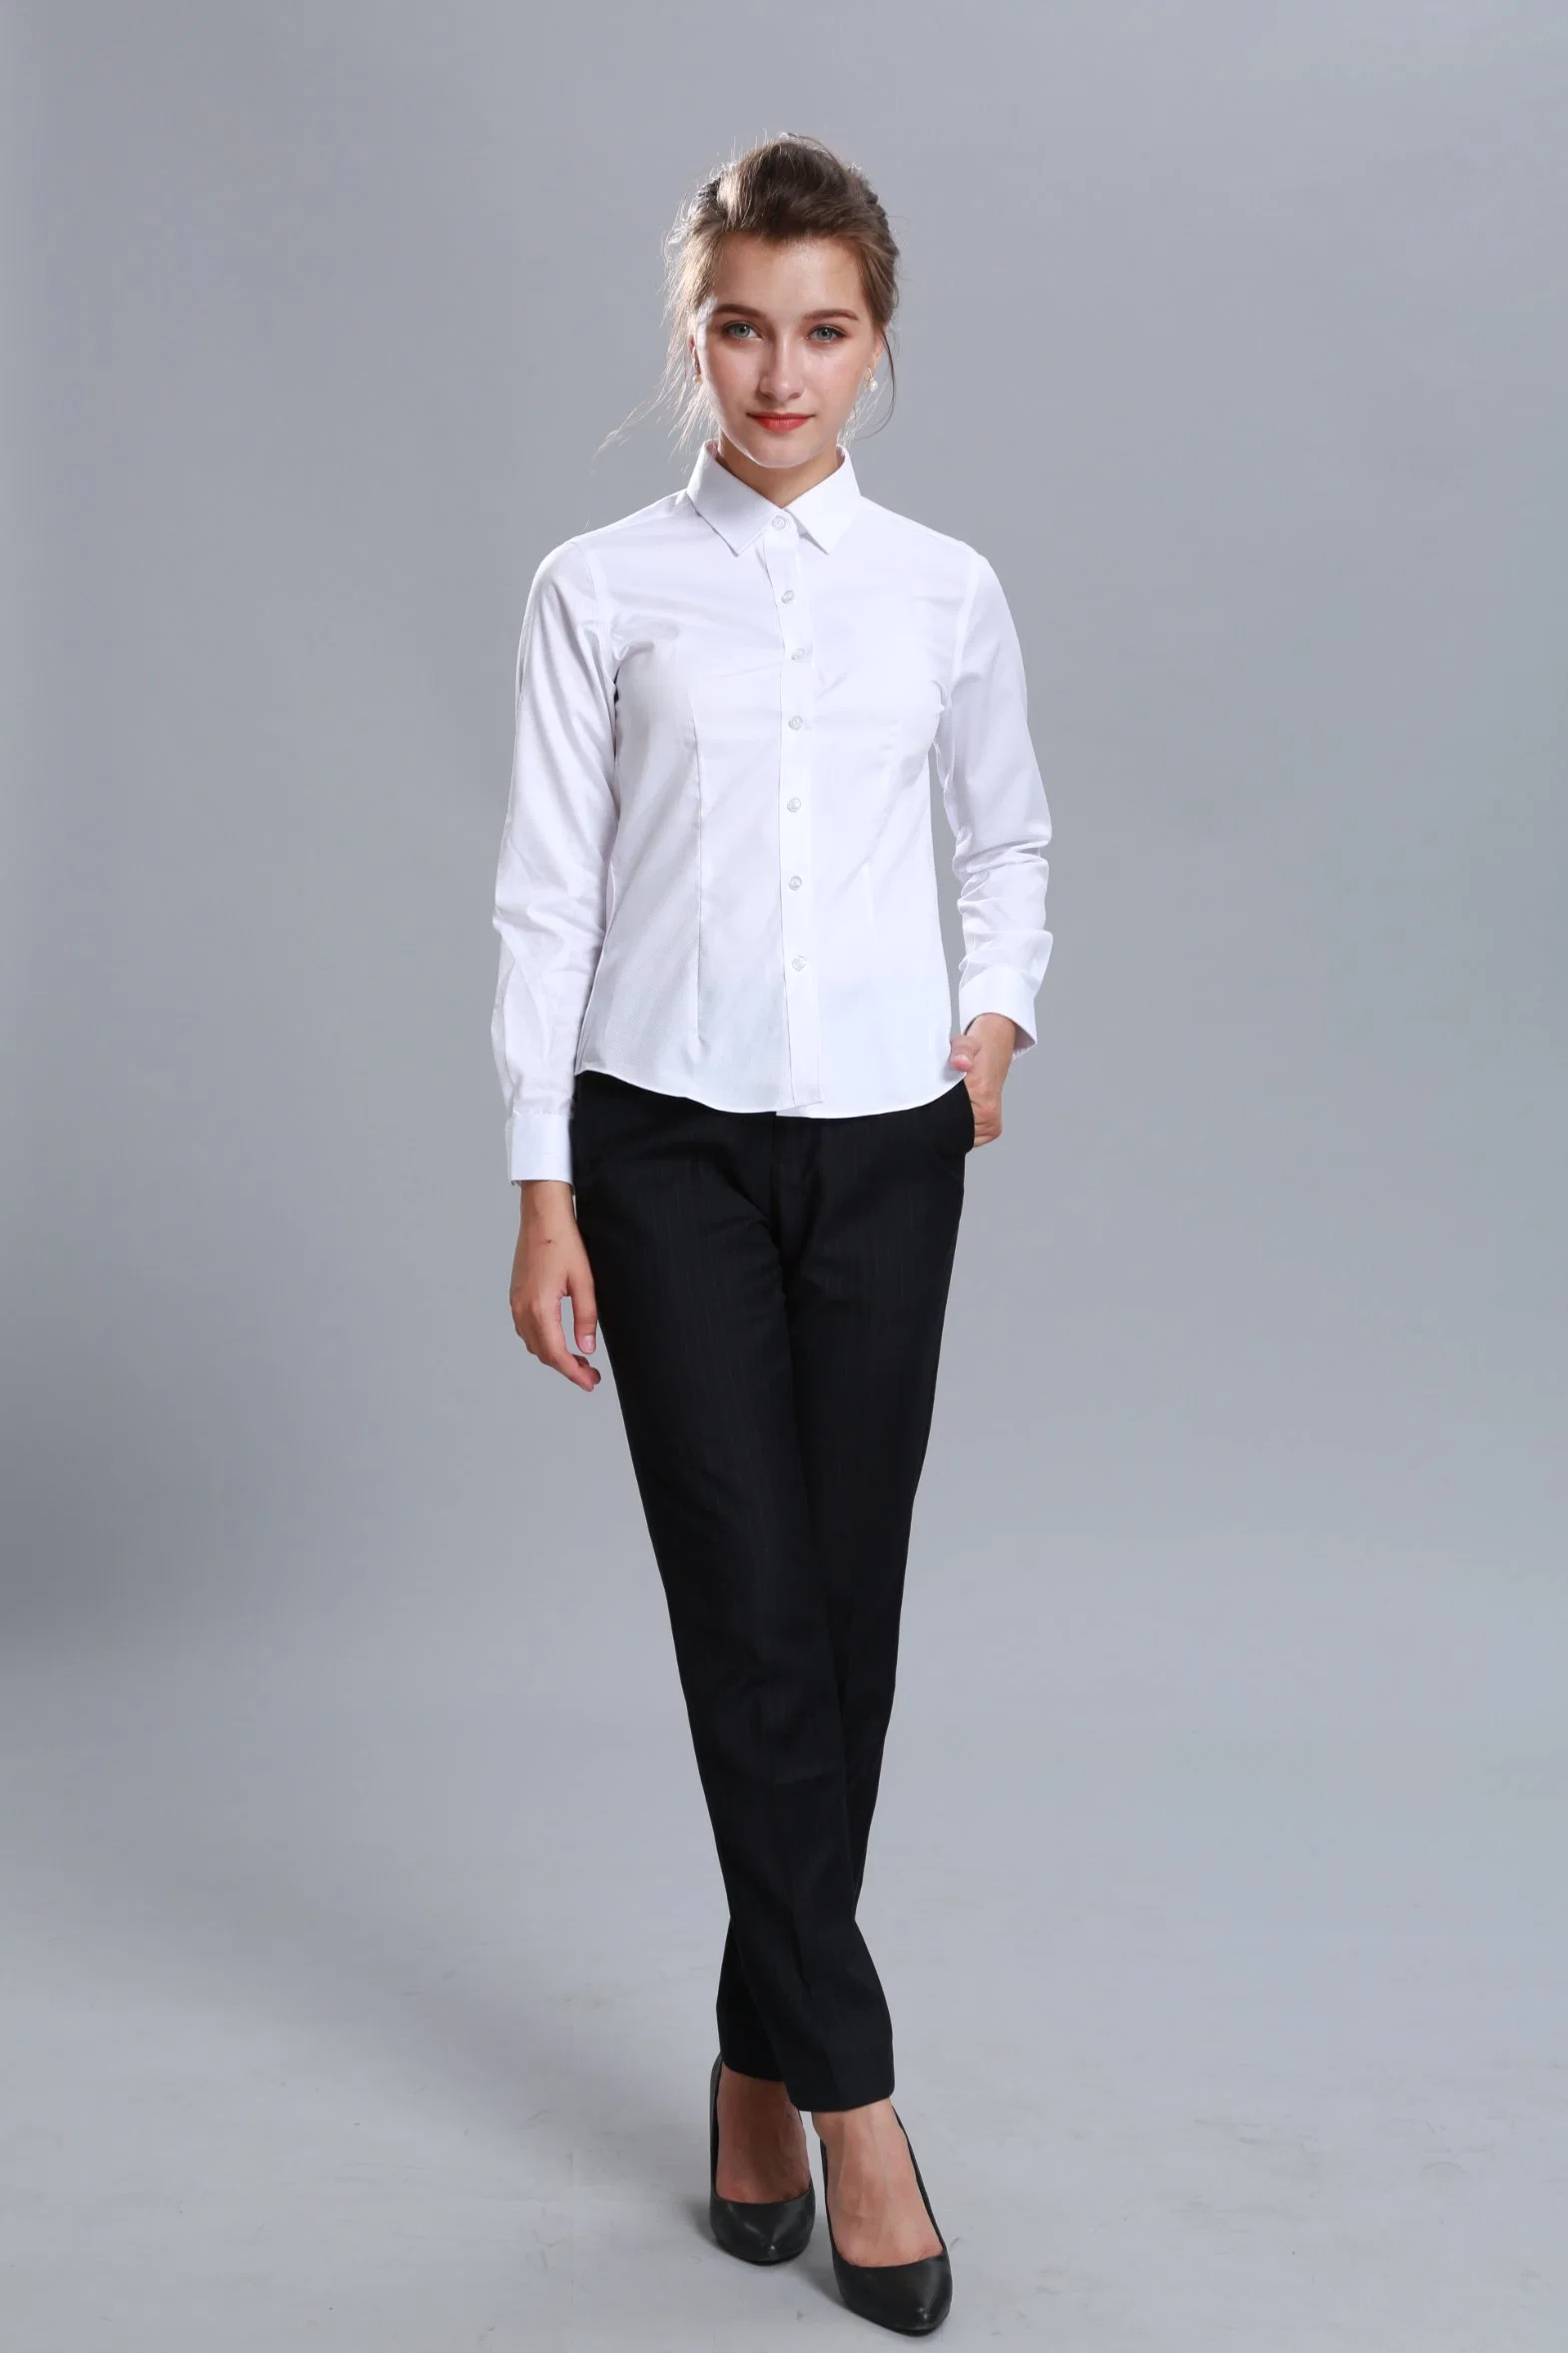 OEM Shirts, Blouse Overalls, Professional Clothes, Long-Sleeved Shirts Wholesale/Supplier Customization